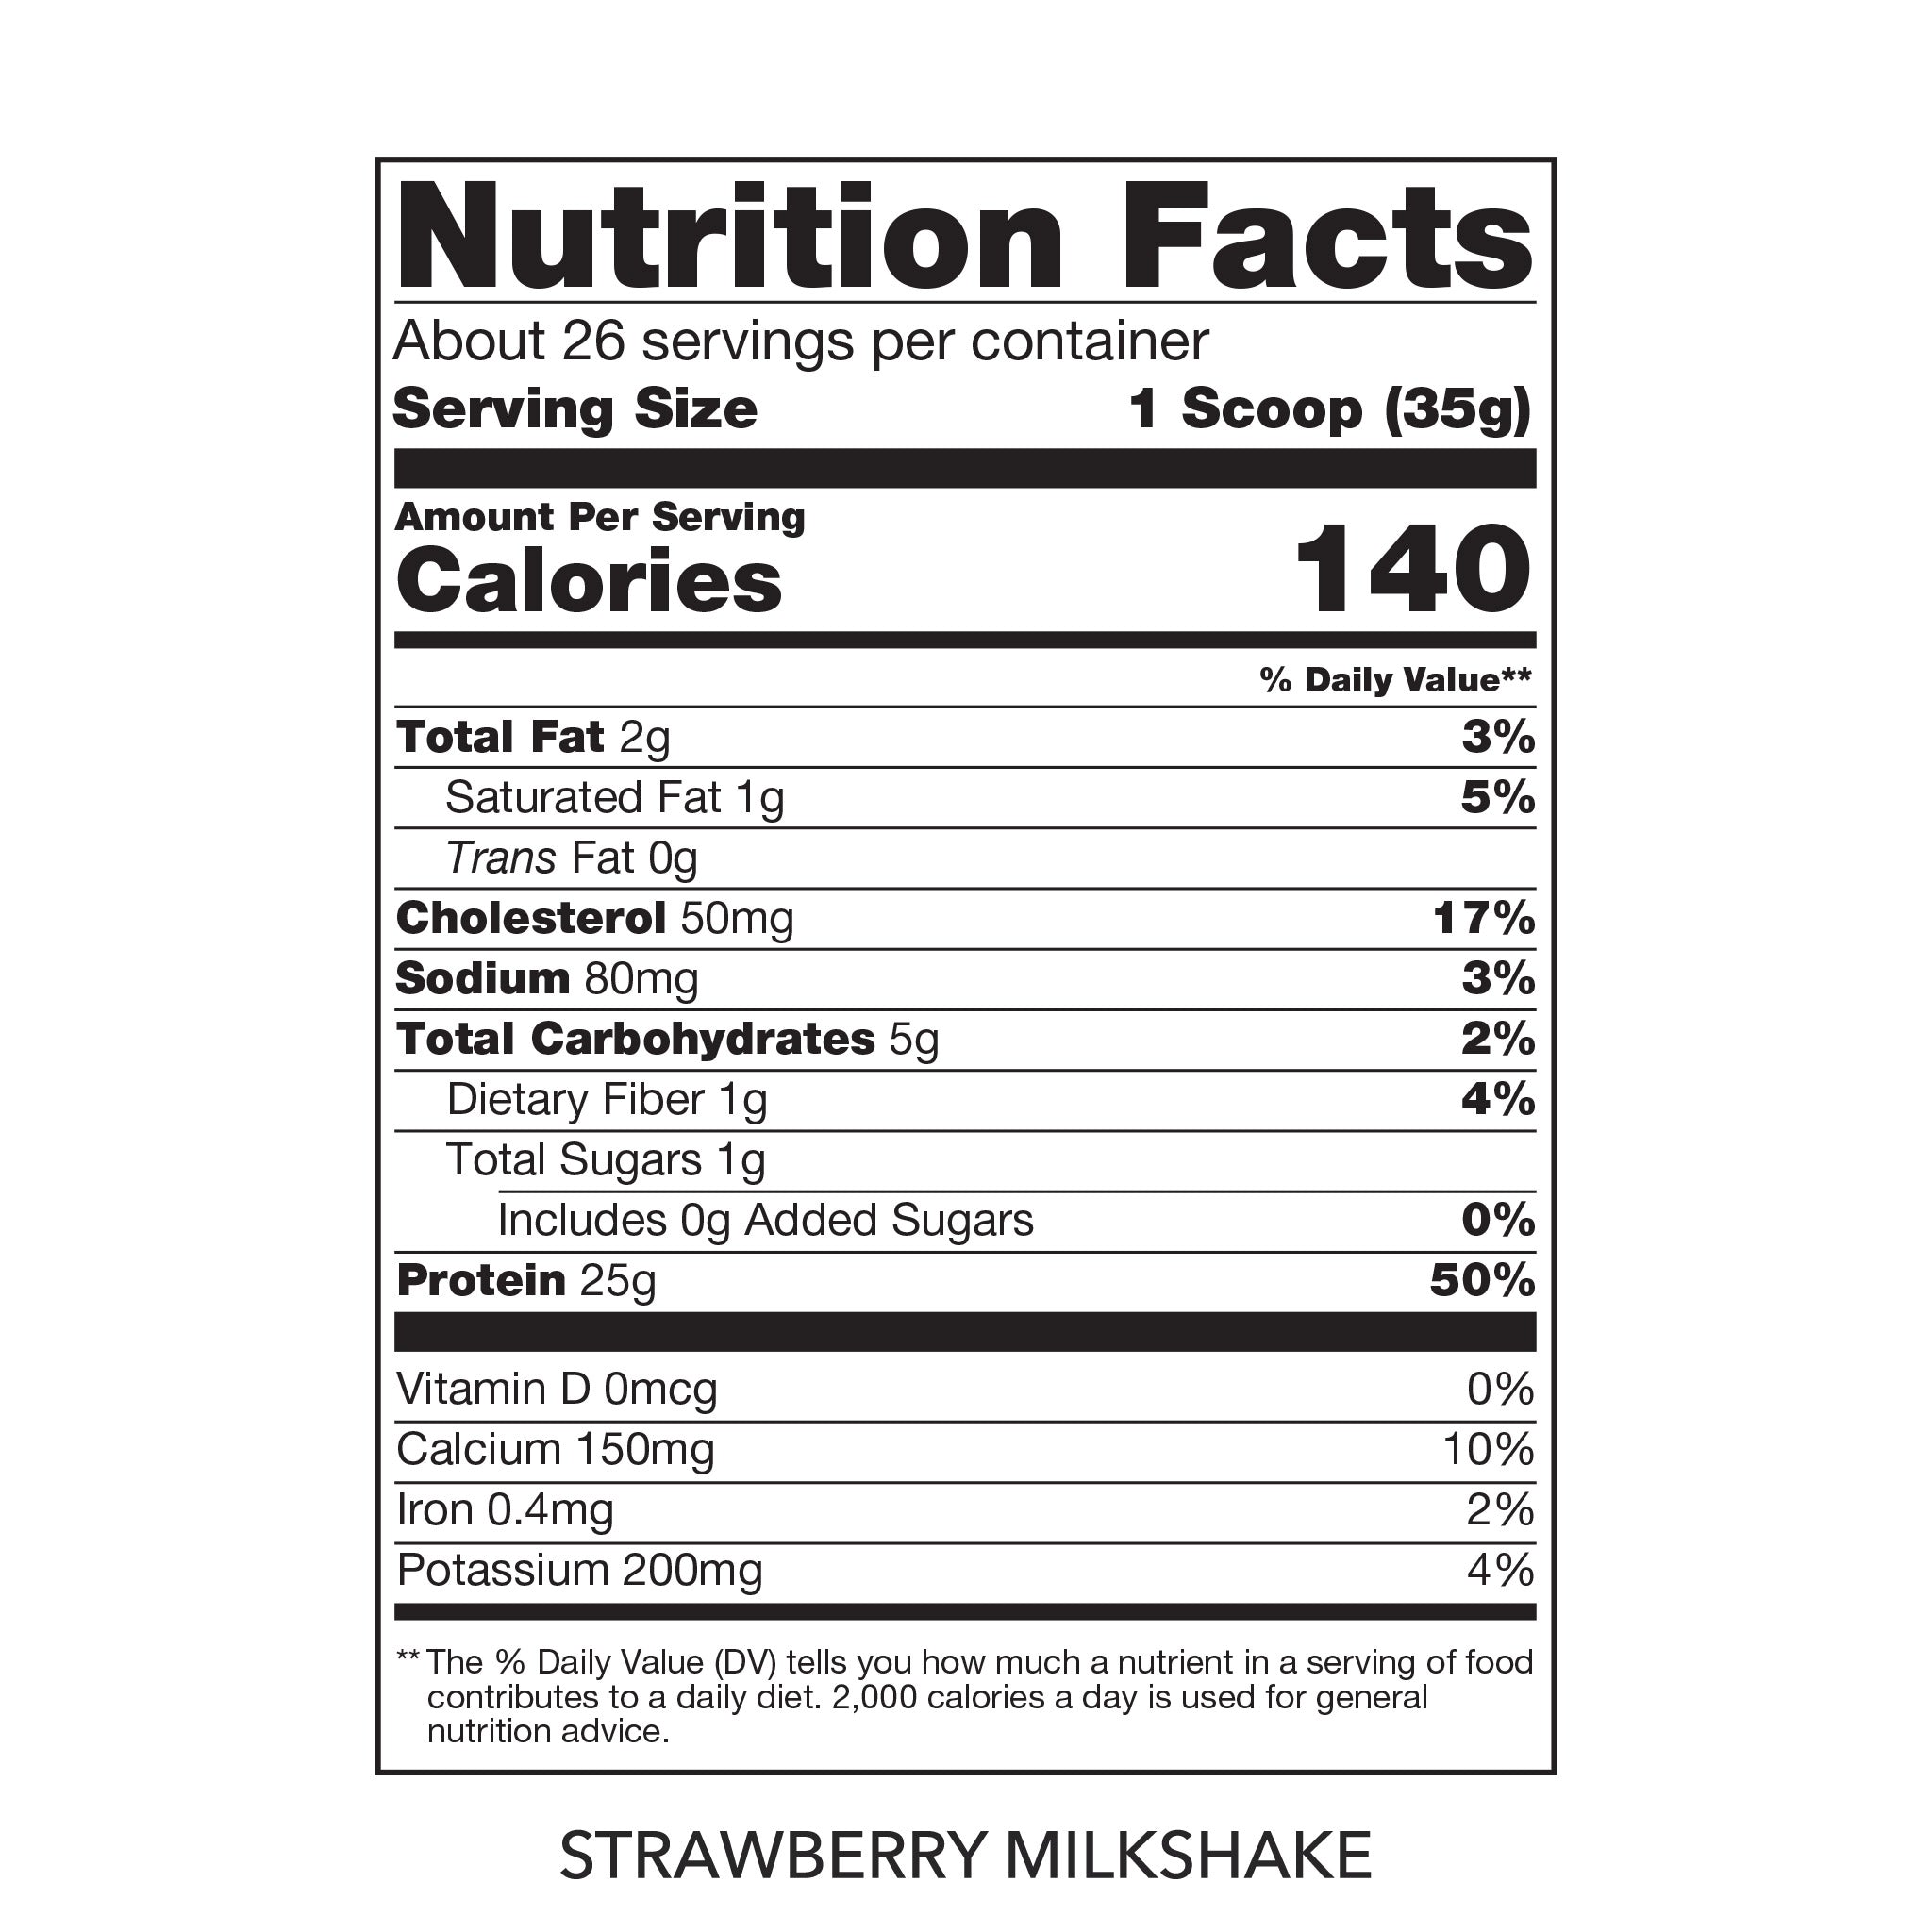 steel whey protein concentrate, wpc-80 supplement facts, strawberry milkshake